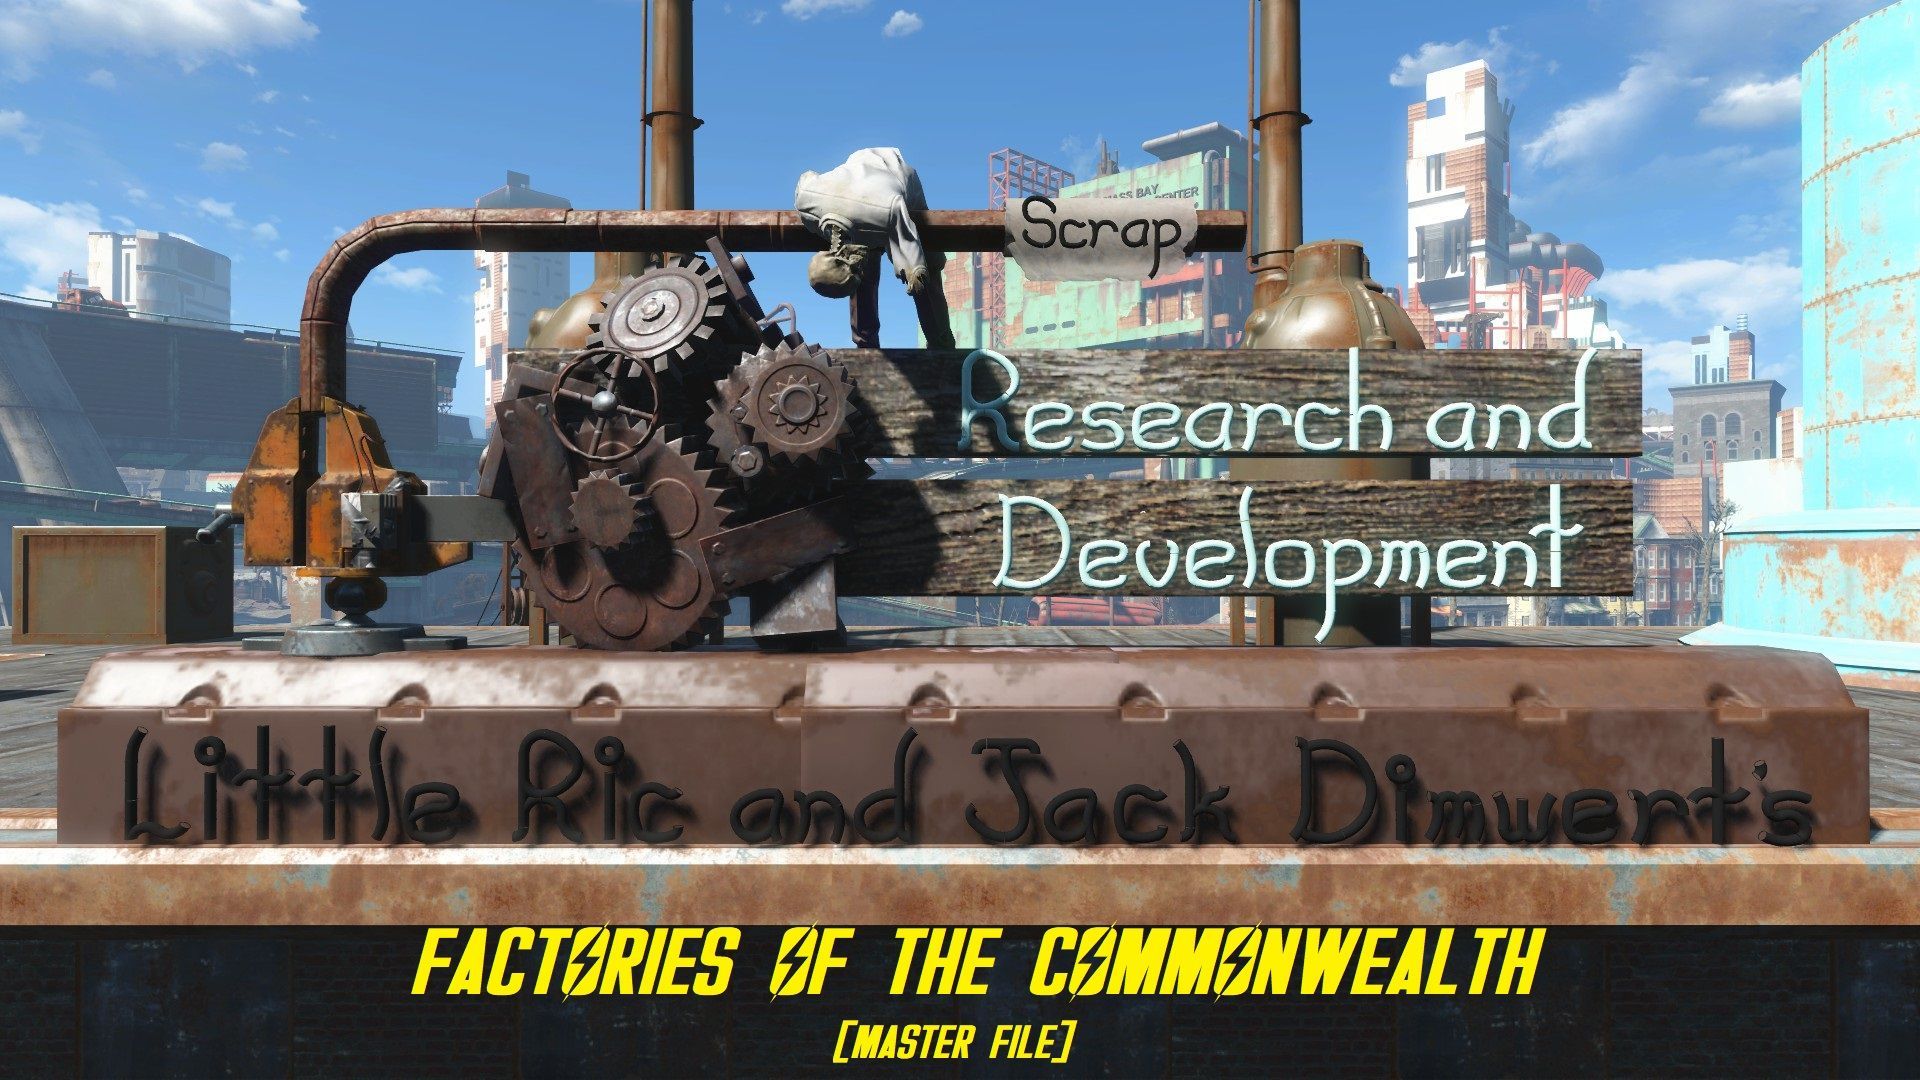 Factories of the Commonwealth by 3lric and Team 3lritech